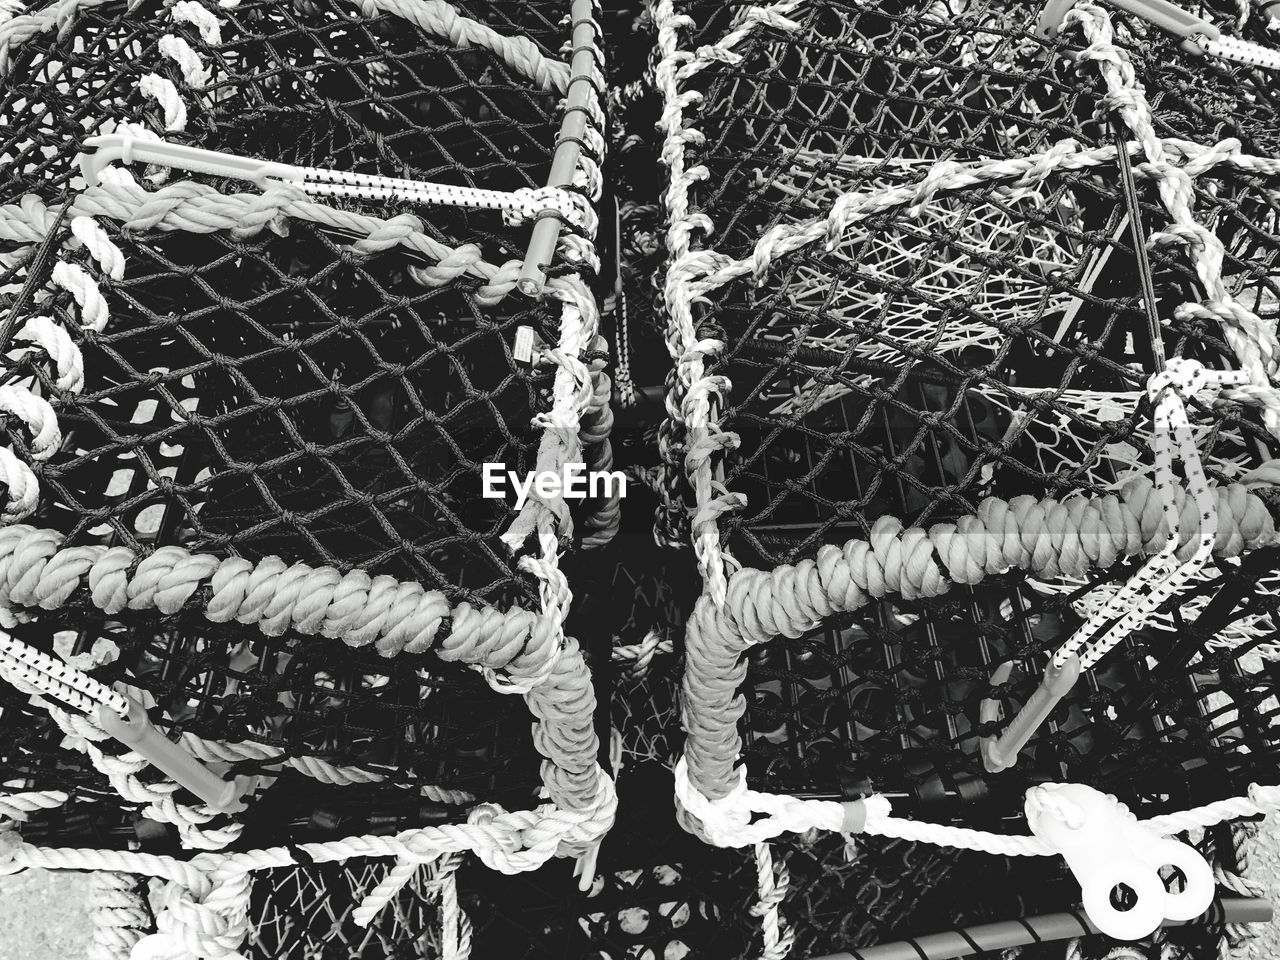 CLOSE-UP HIGH ANGLE VIEW OF FISHING NETS